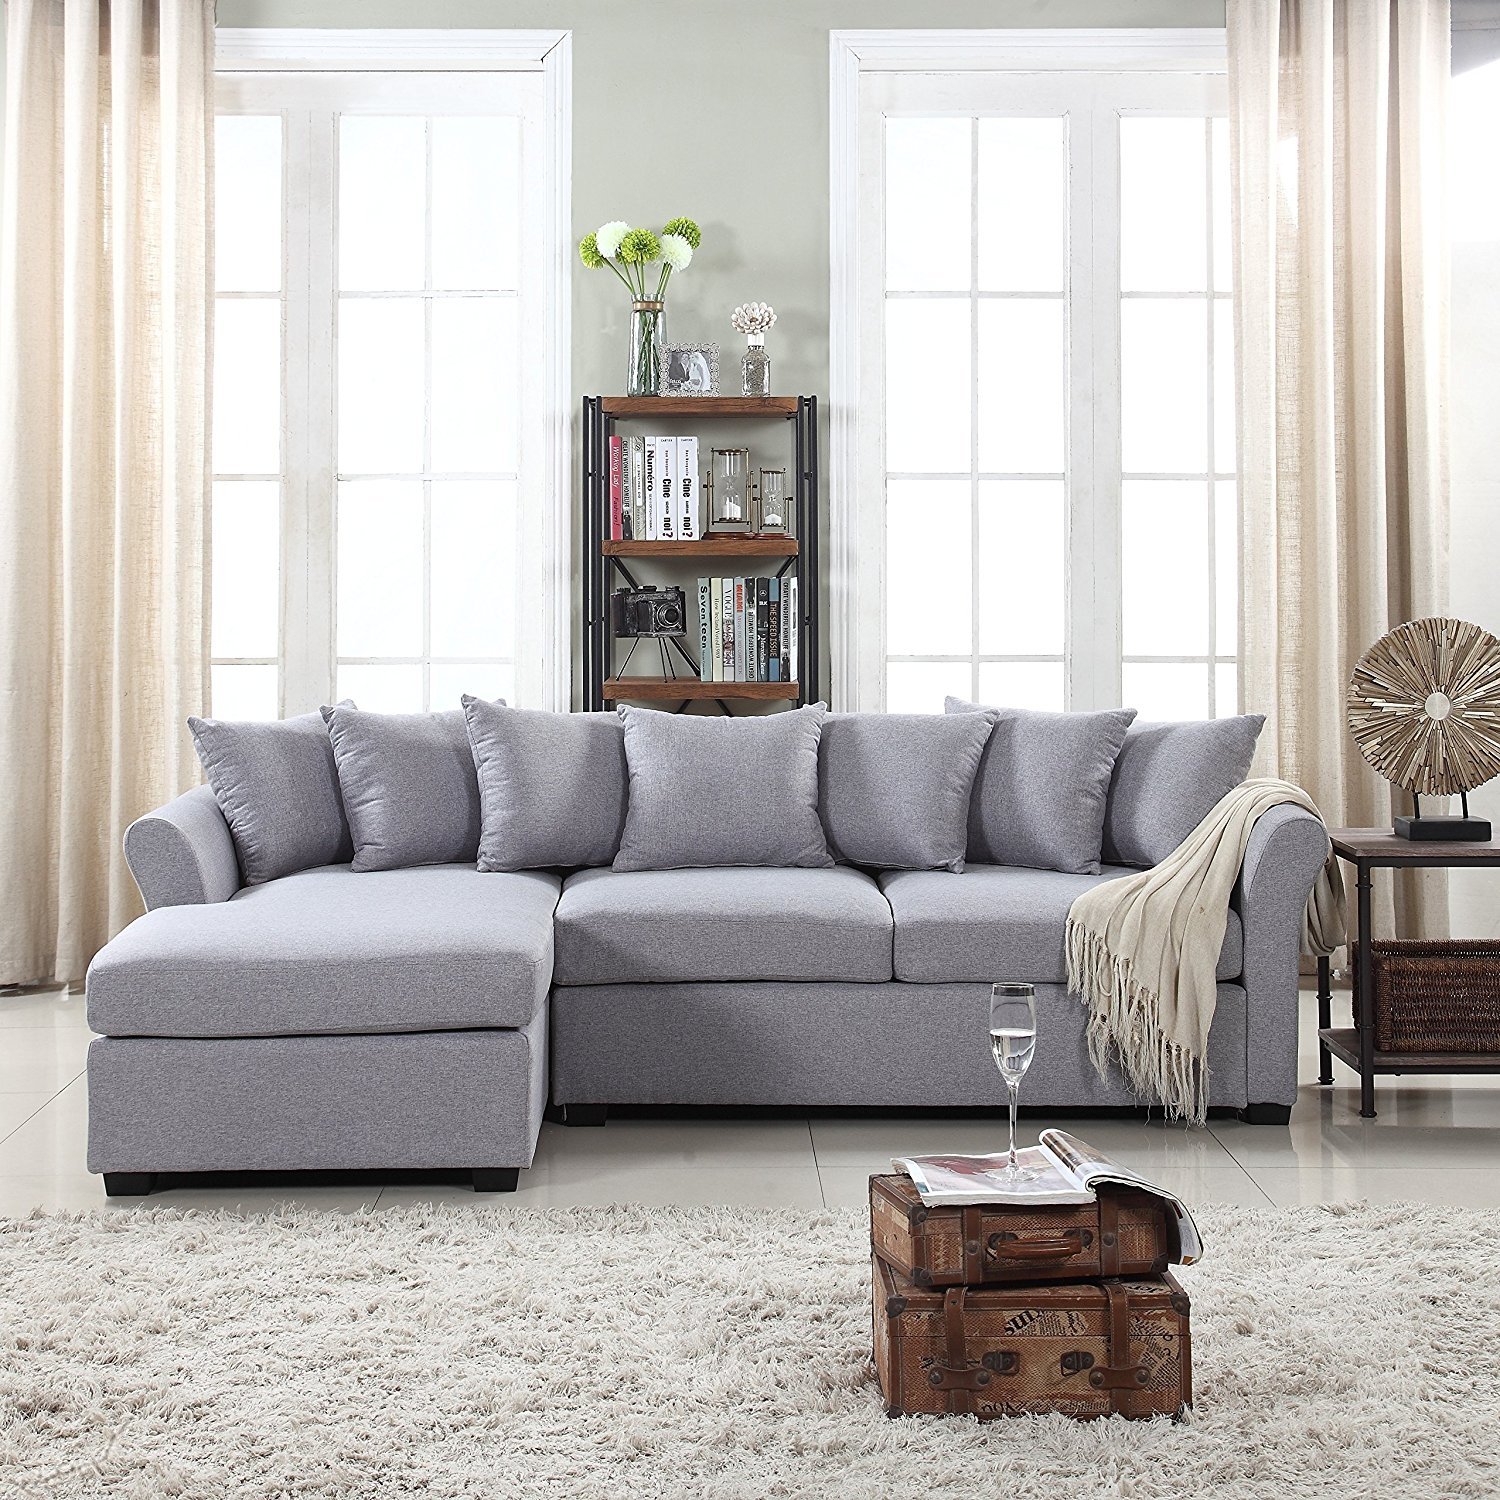 Modern Large Fabric Sectional Sofa, LShape Couch, Extra